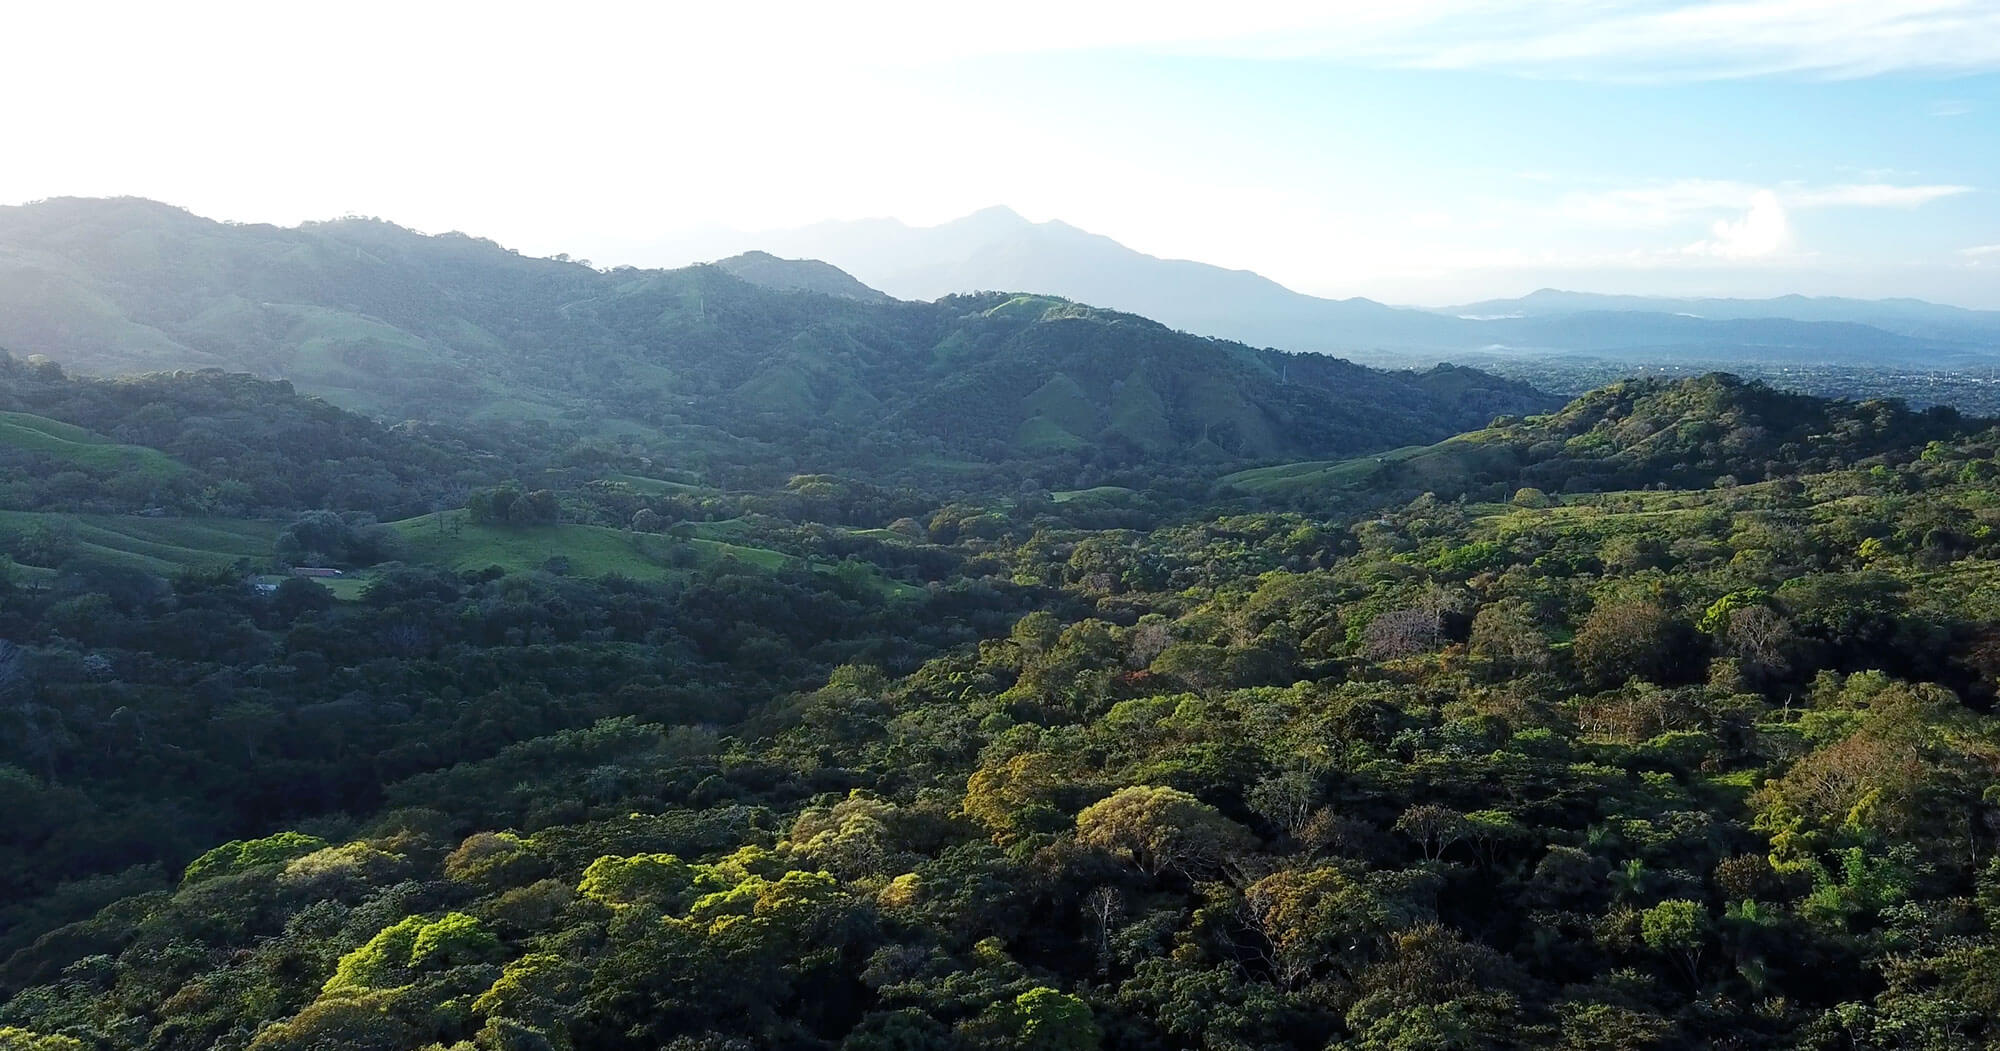   Designing a Regenerative Future   Alegría Village is a new ecological neighborhood in the hills of San Mateo, Costa Rica.   Learn More  